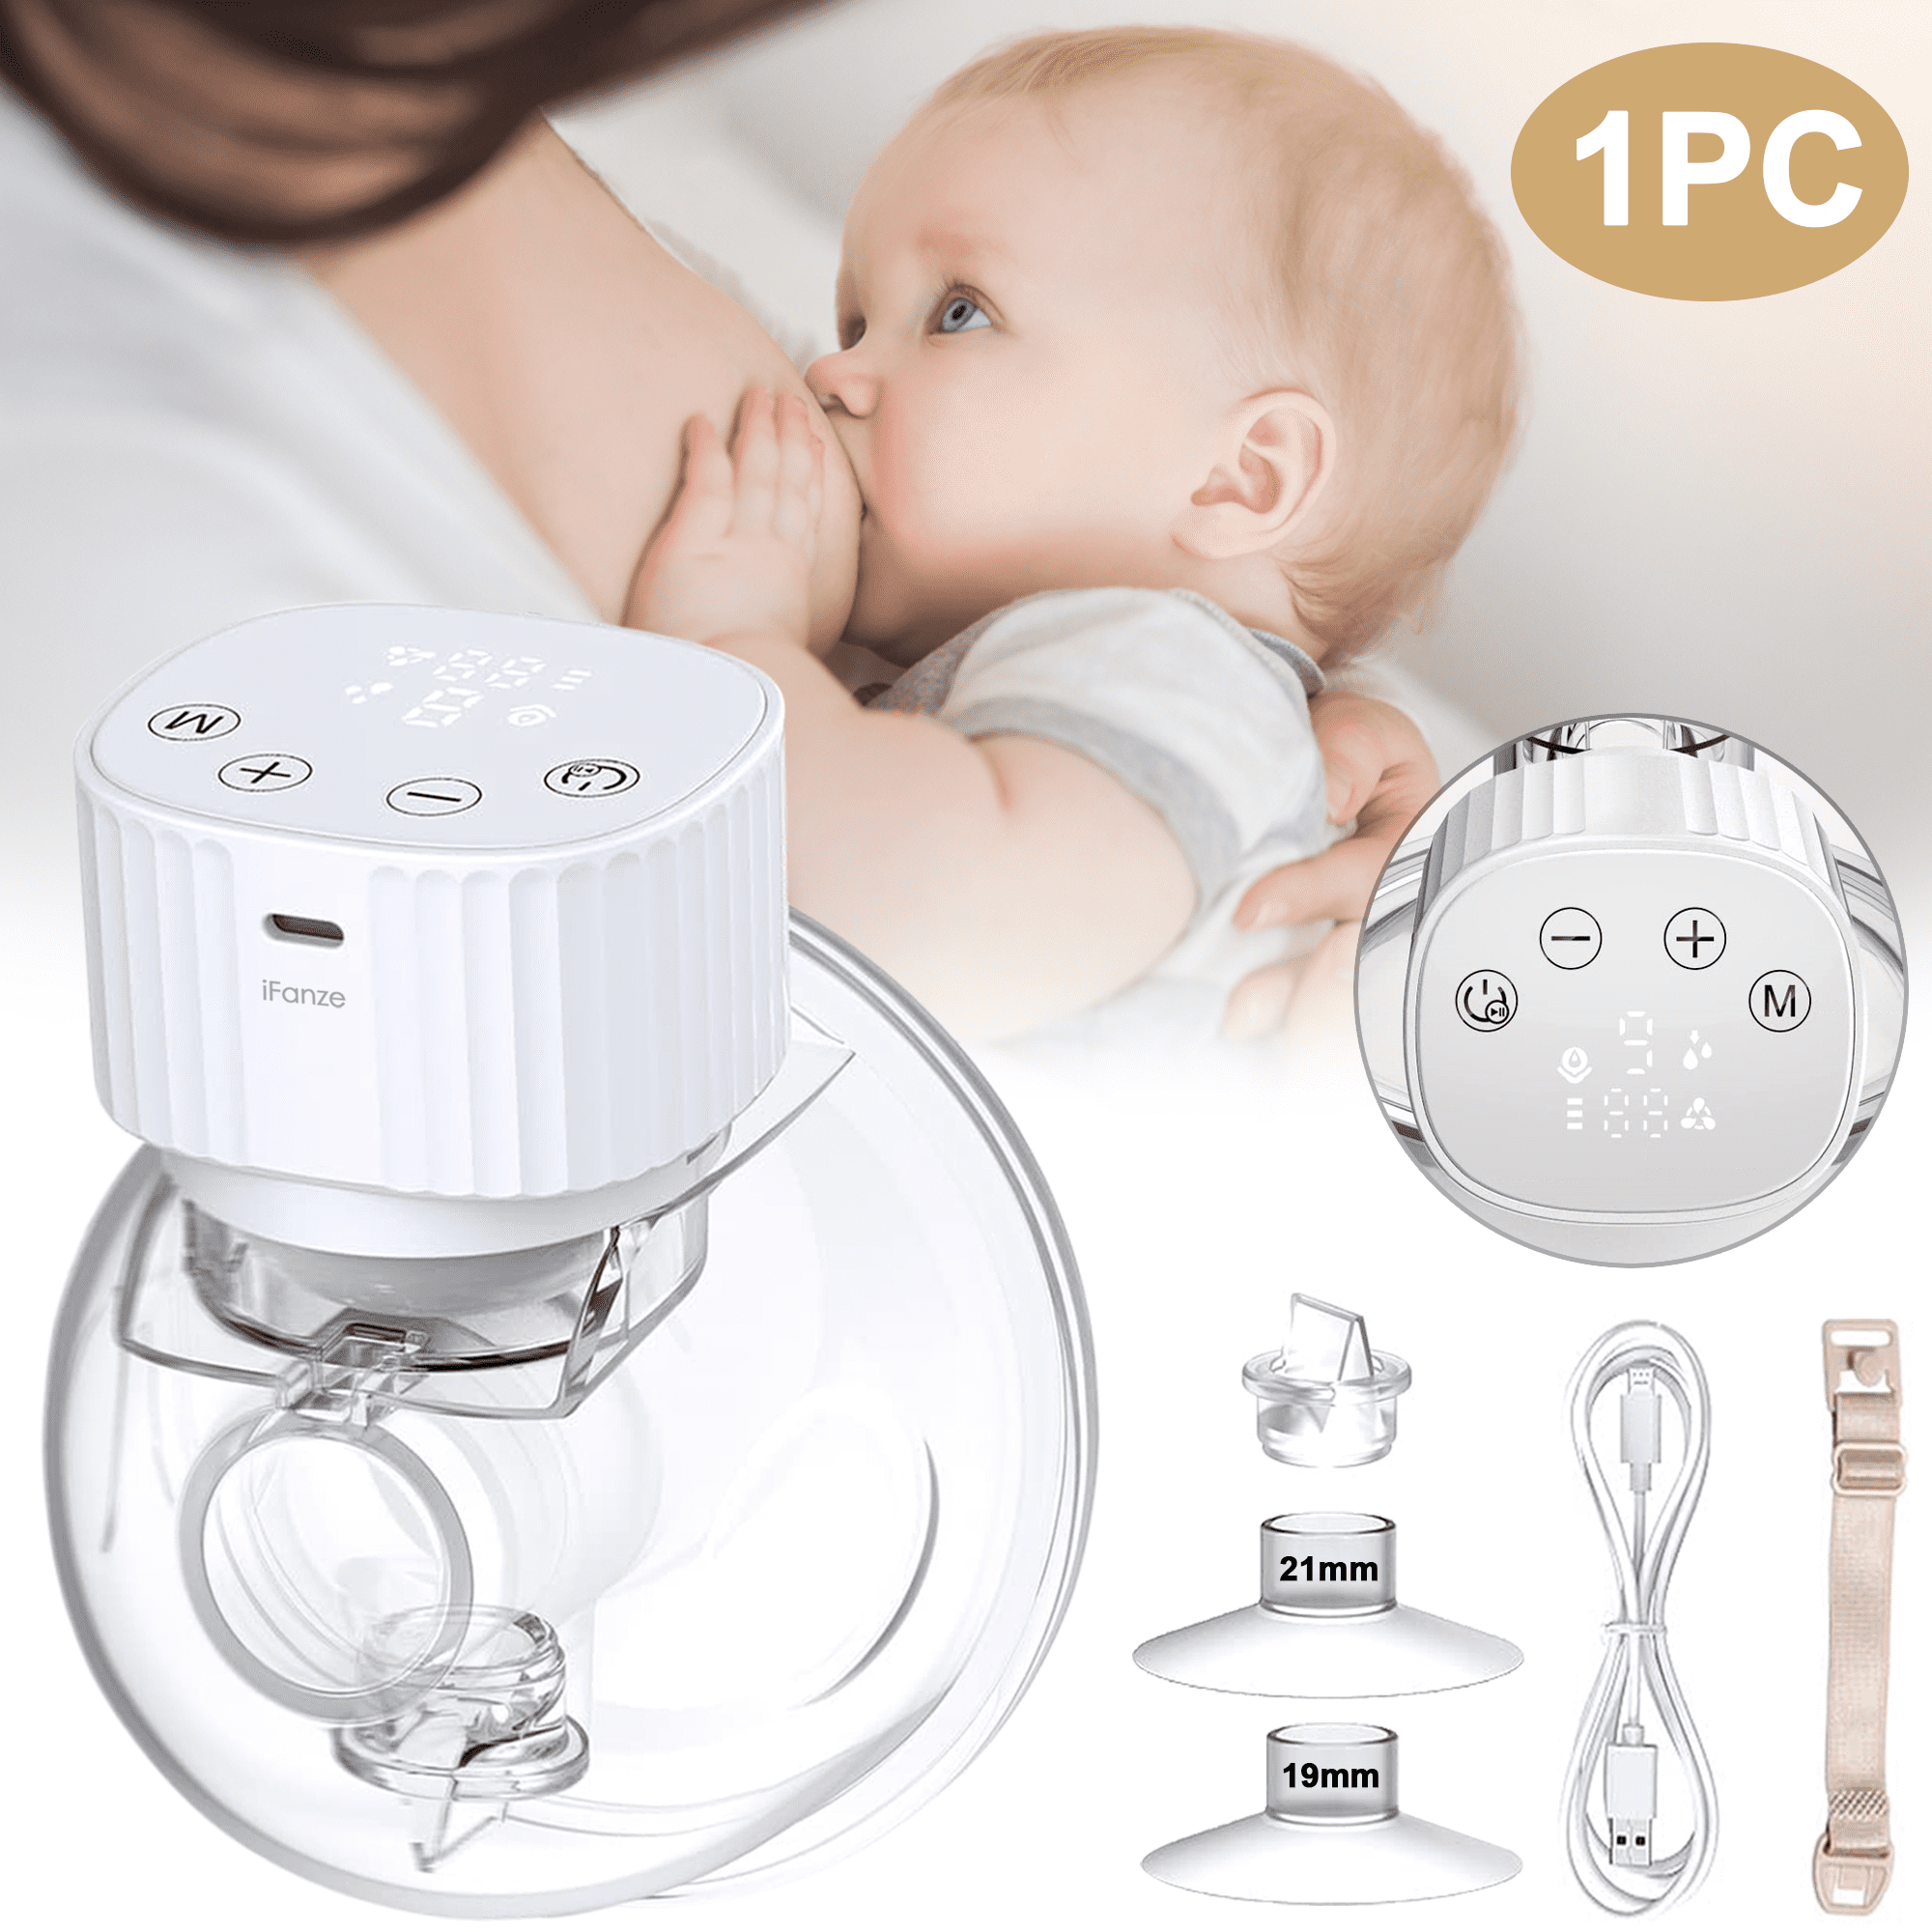 iFanze Wearable Breast Pump, 3 Modes & 9 Levels Wireless Hands Free Electric Breast Pump, 19/21/25mm